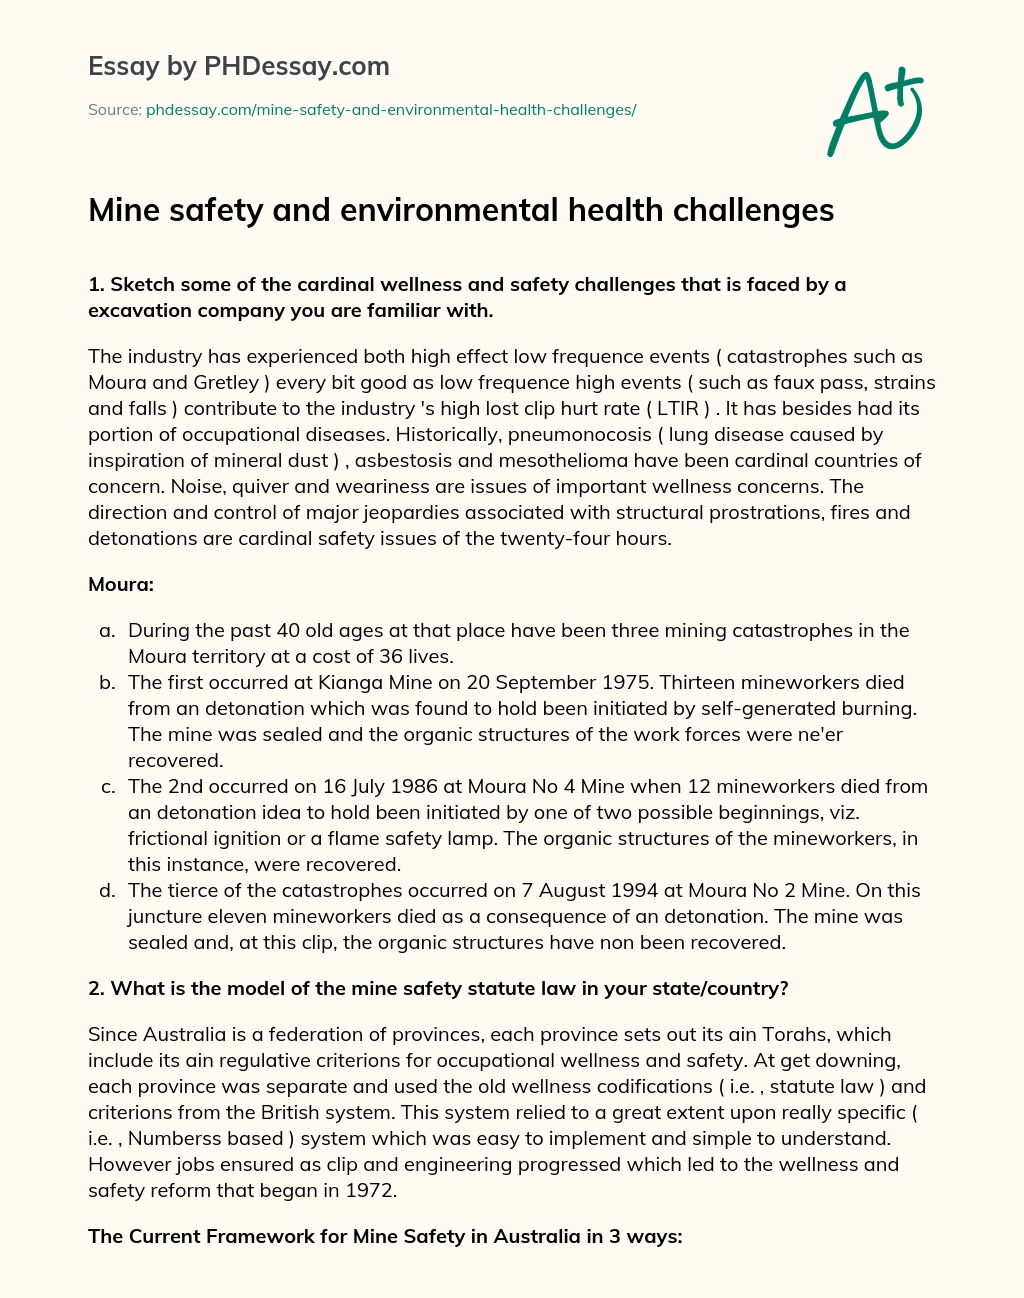 Mine safety and environmental health challenges essay